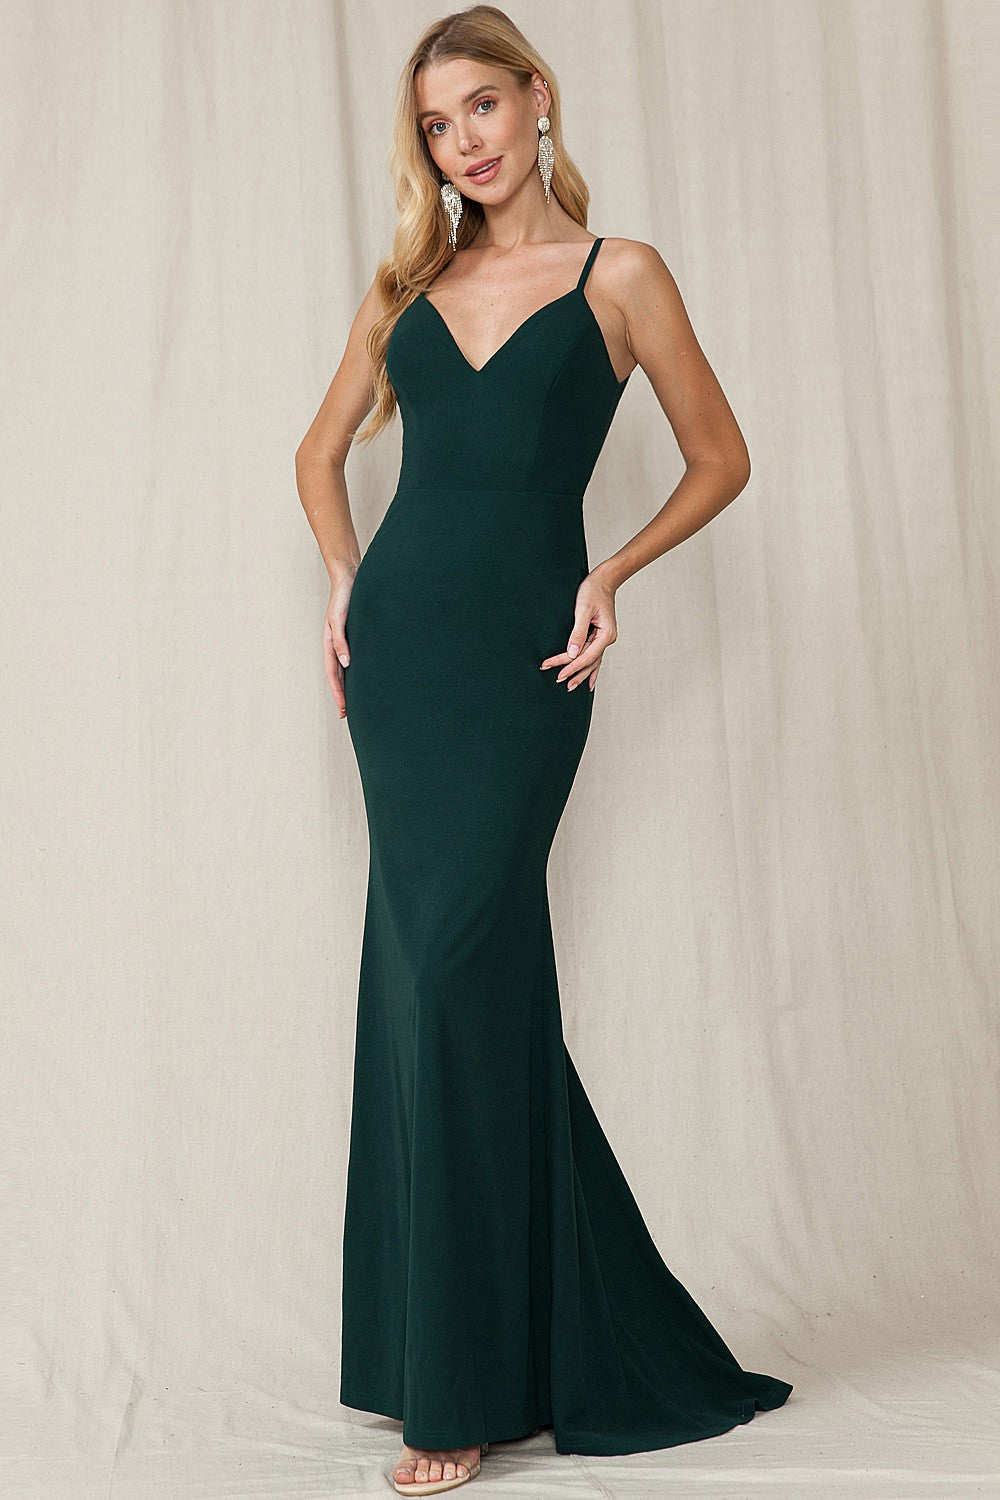 MG GOWN EMERALD